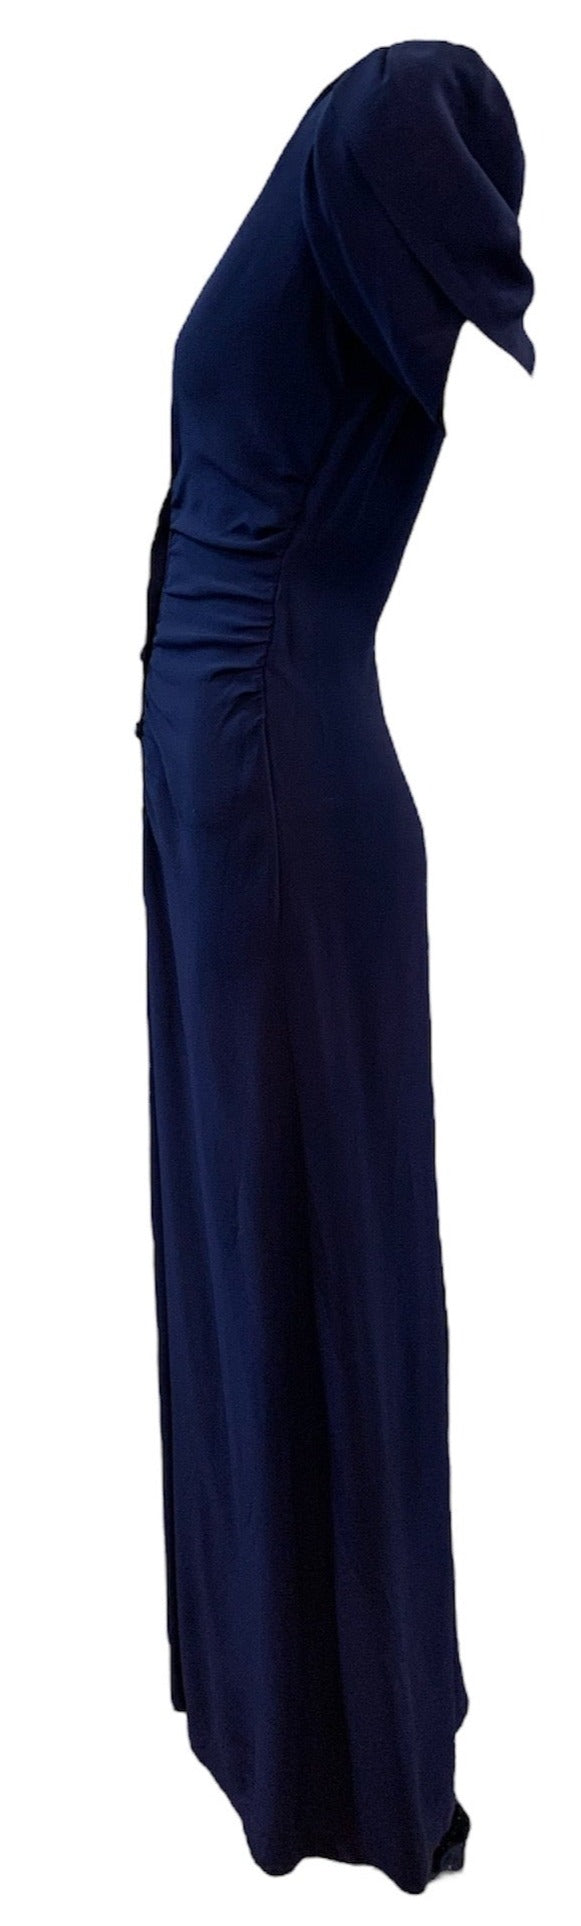 YSL Rive Gauche Blue Satin Backed Crepe 70s Look Maxi Dress SIDE 2 of 5